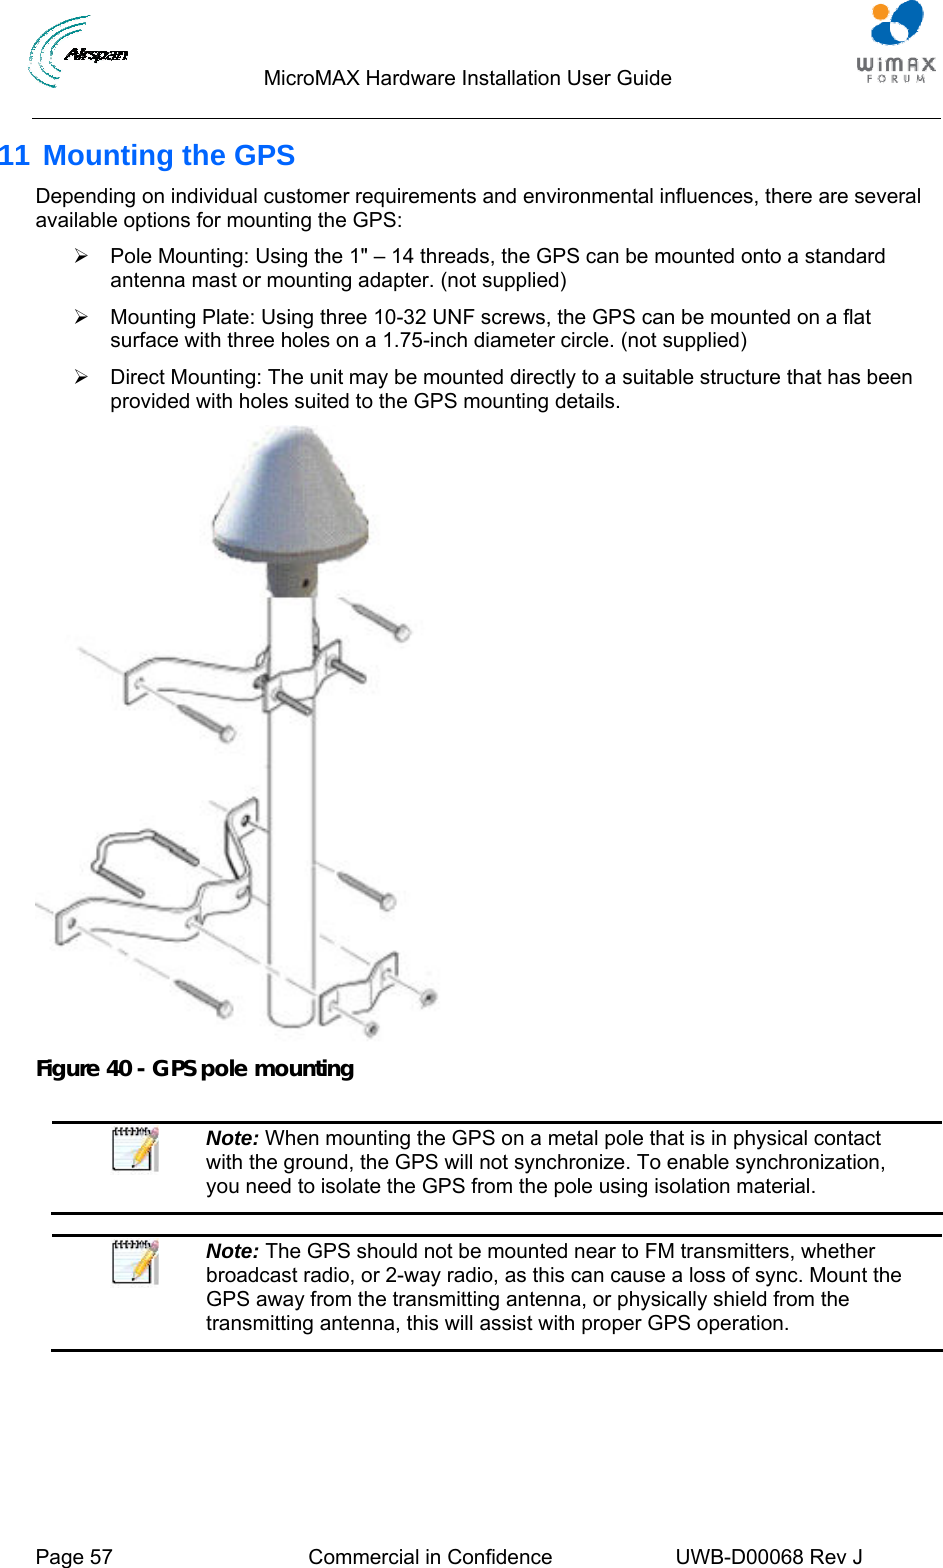                                  MicroMAX Hardware Installation User Guide     Page 57  Commercial in Confidence  UWB-D00068 Rev J   11 Mounting the GPS Depending on individual customer requirements and environmental influences, there are several available options for mounting the GPS: ¾  Pole Mounting: Using the 1&quot; – 14 threads, the GPS can be mounted onto a standard antenna mast or mounting adapter. (not supplied) ¾  Mounting Plate: Using three 10-32 UNF screws, the GPS can be mounted on a flat surface with three holes on a 1.75-inch diameter circle. (not supplied) ¾  Direct Mounting: The unit may be mounted directly to a suitable structure that has been provided with holes suited to the GPS mounting details.  Figure 40 - GPS pole mounting   Note: When mounting the GPS on a metal pole that is in physical contact with the ground, the GPS will not synchronize. To enable synchronization, you need to isolate the GPS from the pole using isolation material.   Note: The GPS should not be mounted near to FM transmitters, whether broadcast radio, or 2-way radio, as this can cause a loss of sync. Mount the GPS away from the transmitting antenna, or physically shield from the transmitting antenna, this will assist with proper GPS operation.   